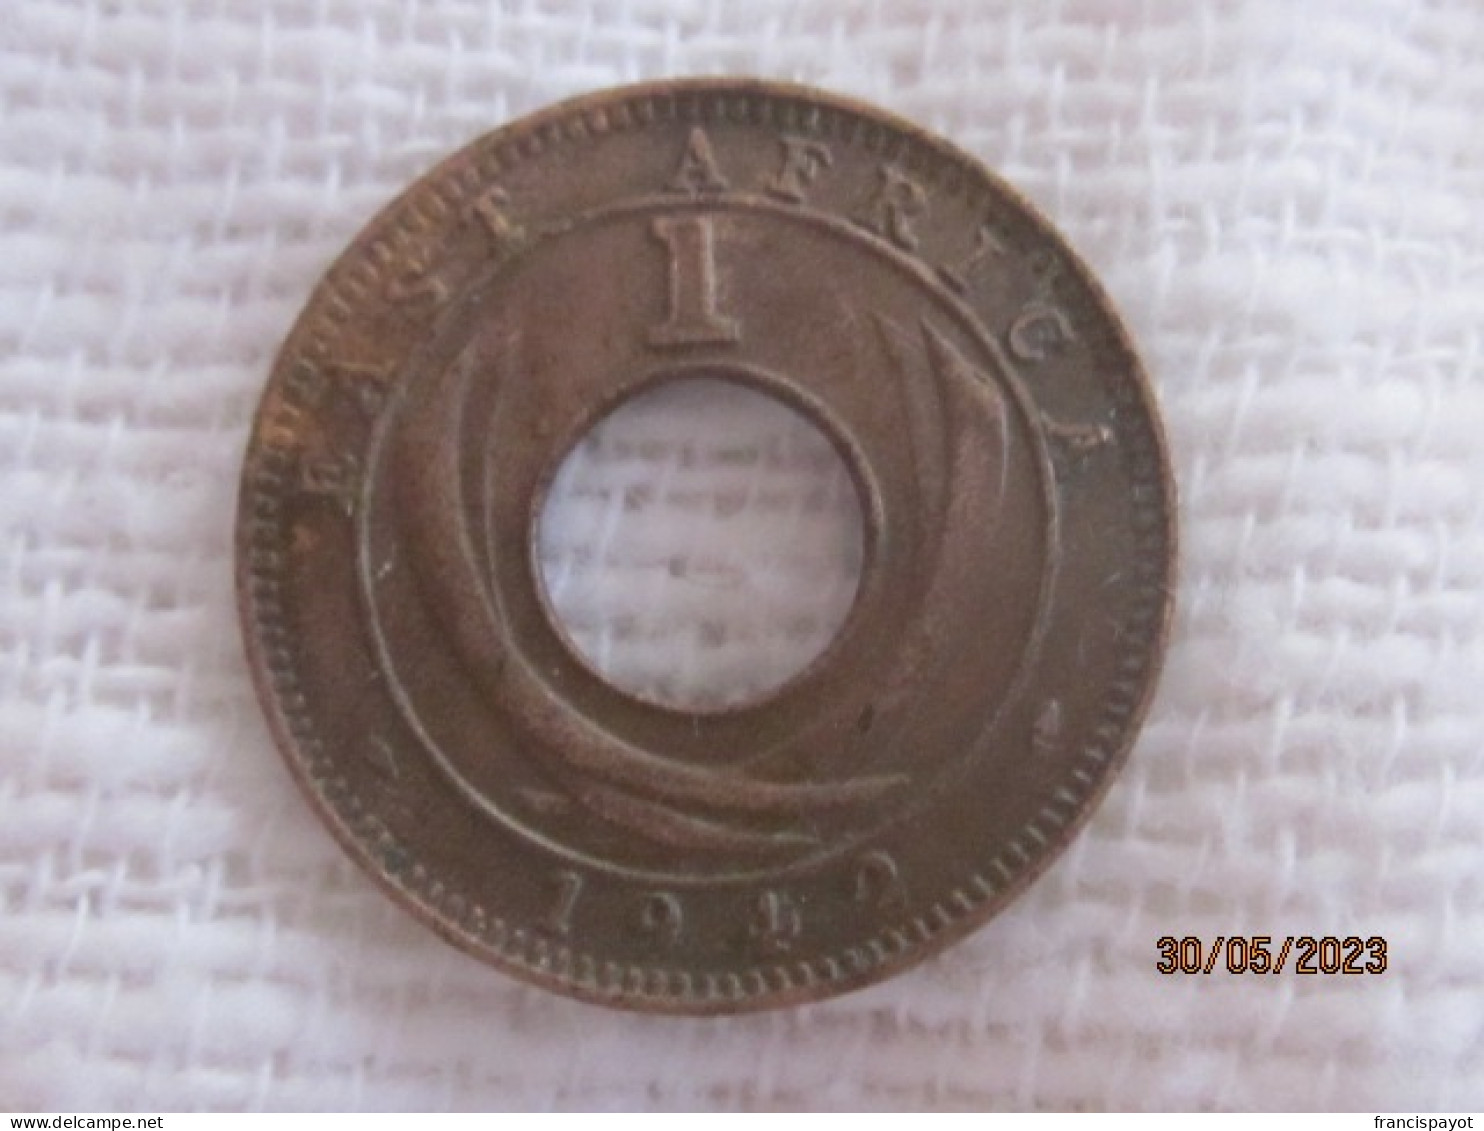 East Africa: 1 Cent 1942 - Colonia Británica